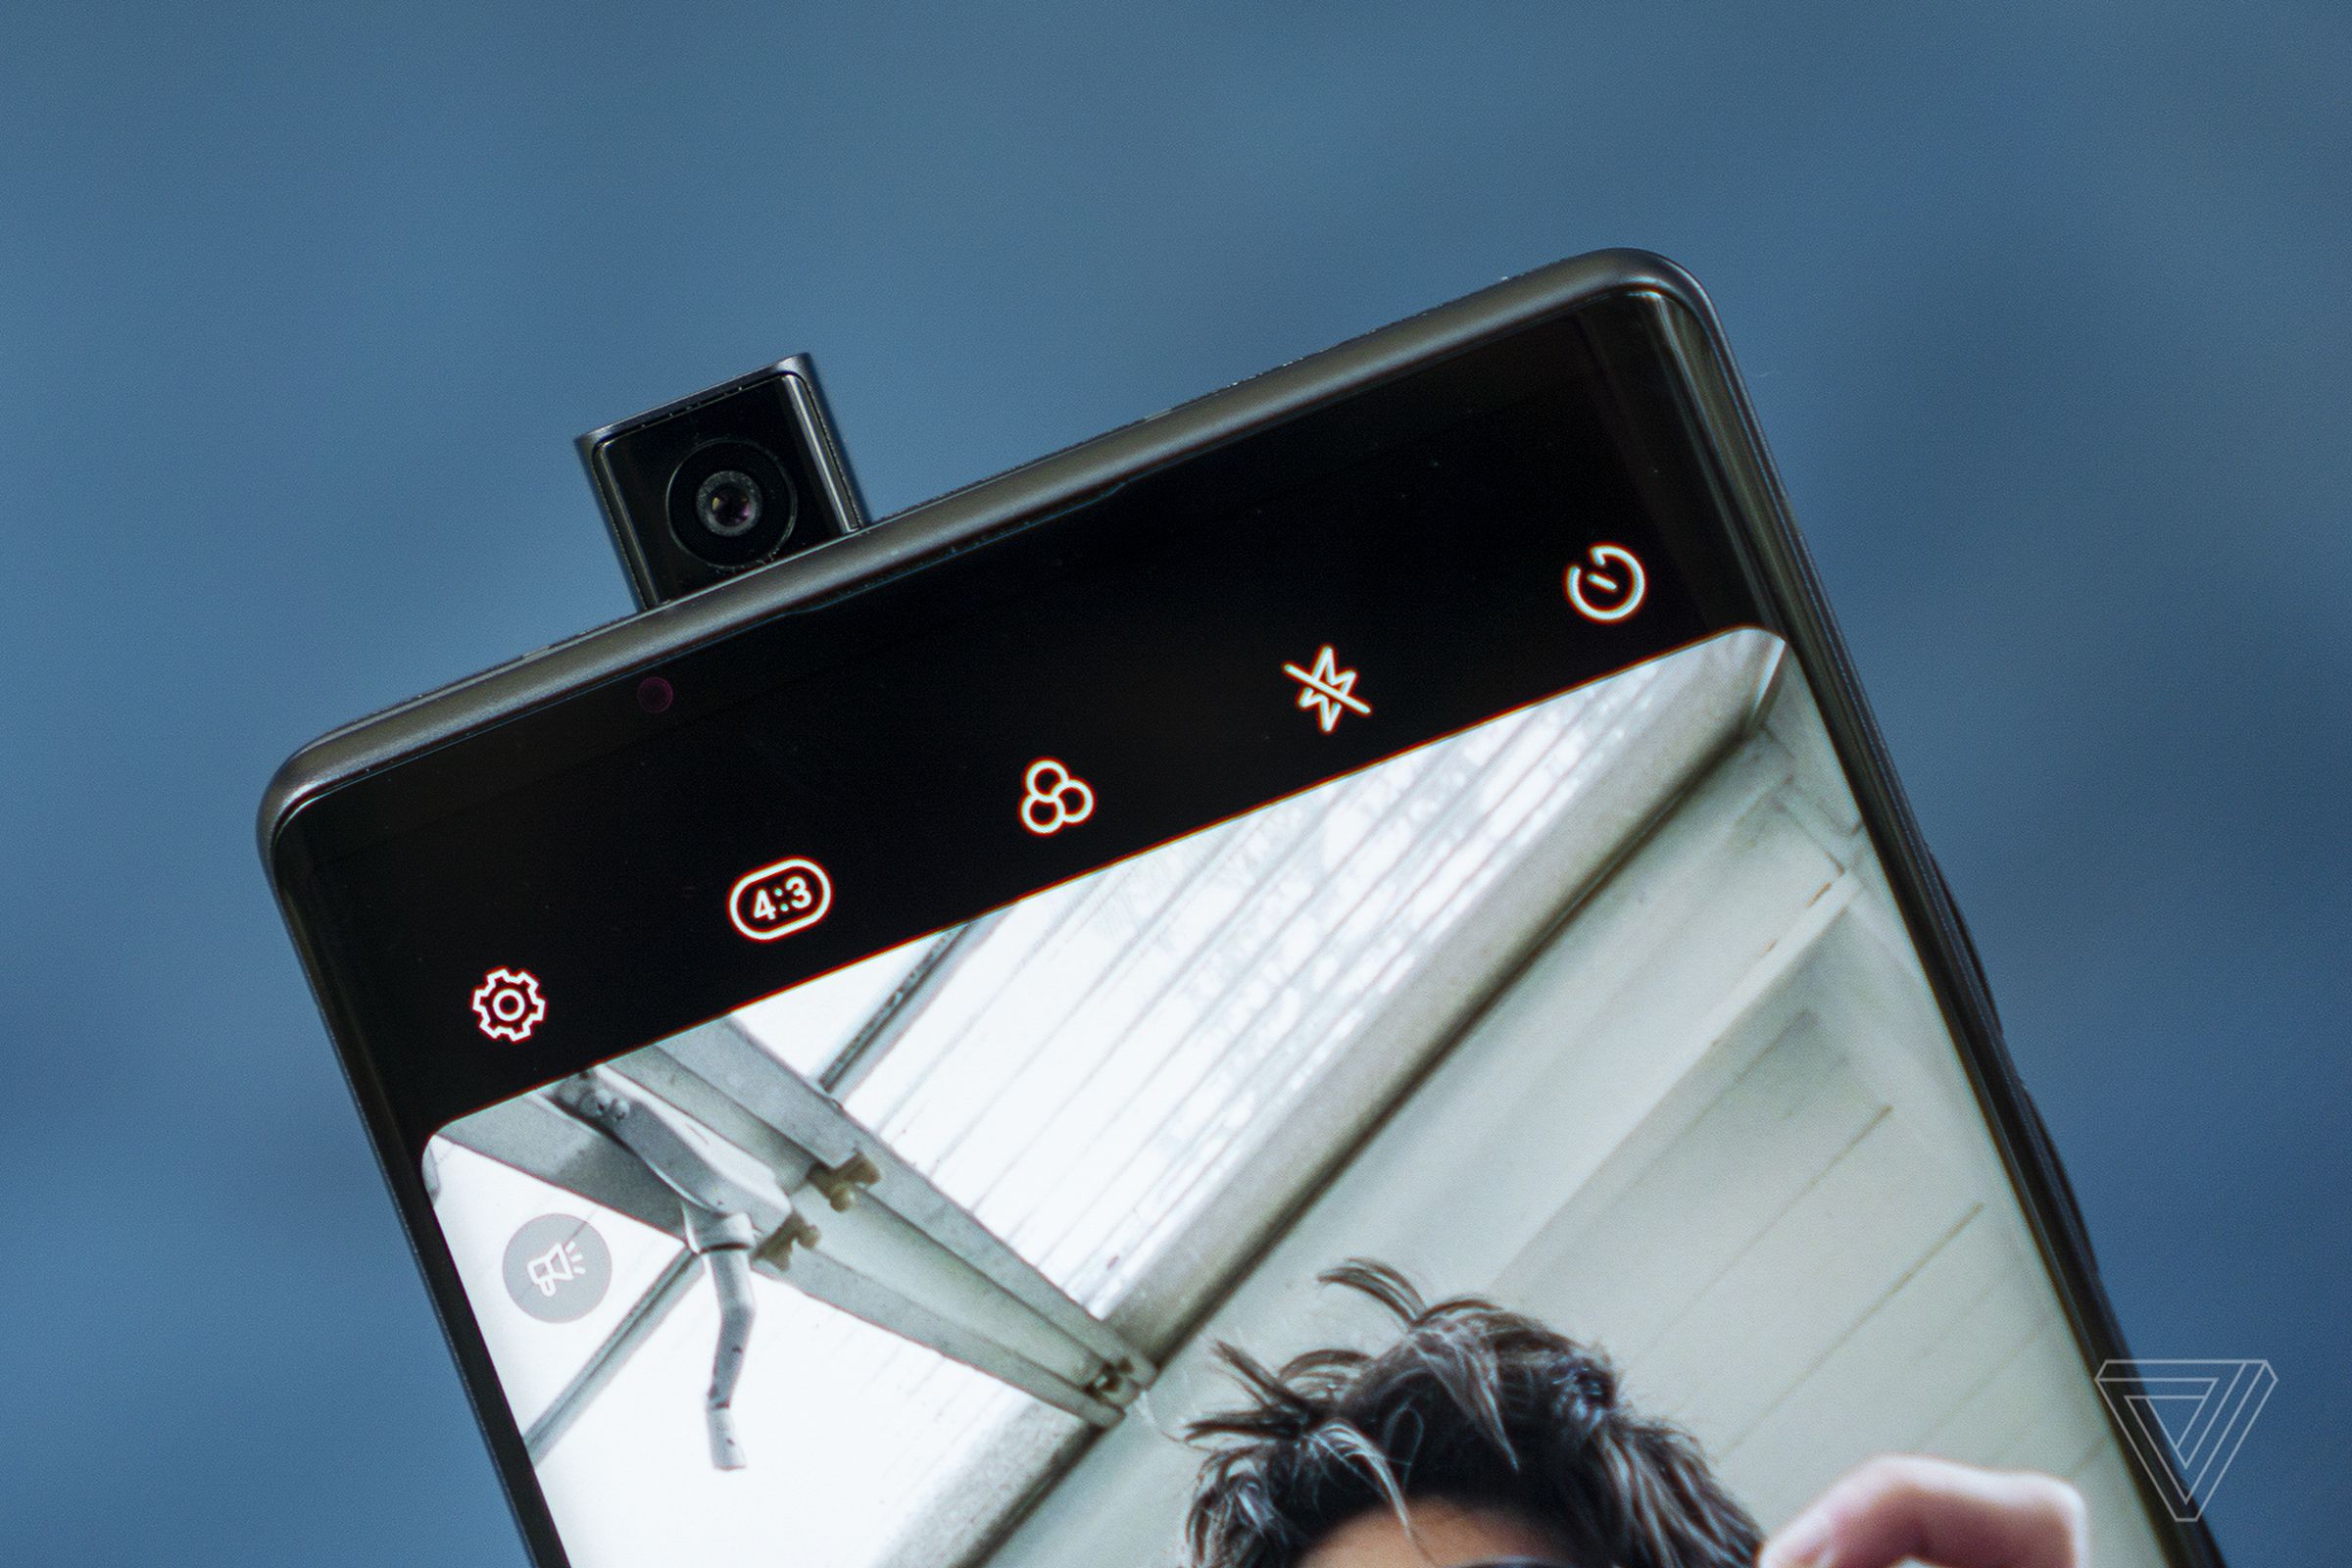 The pop-up selfie camera on the LG Wing.